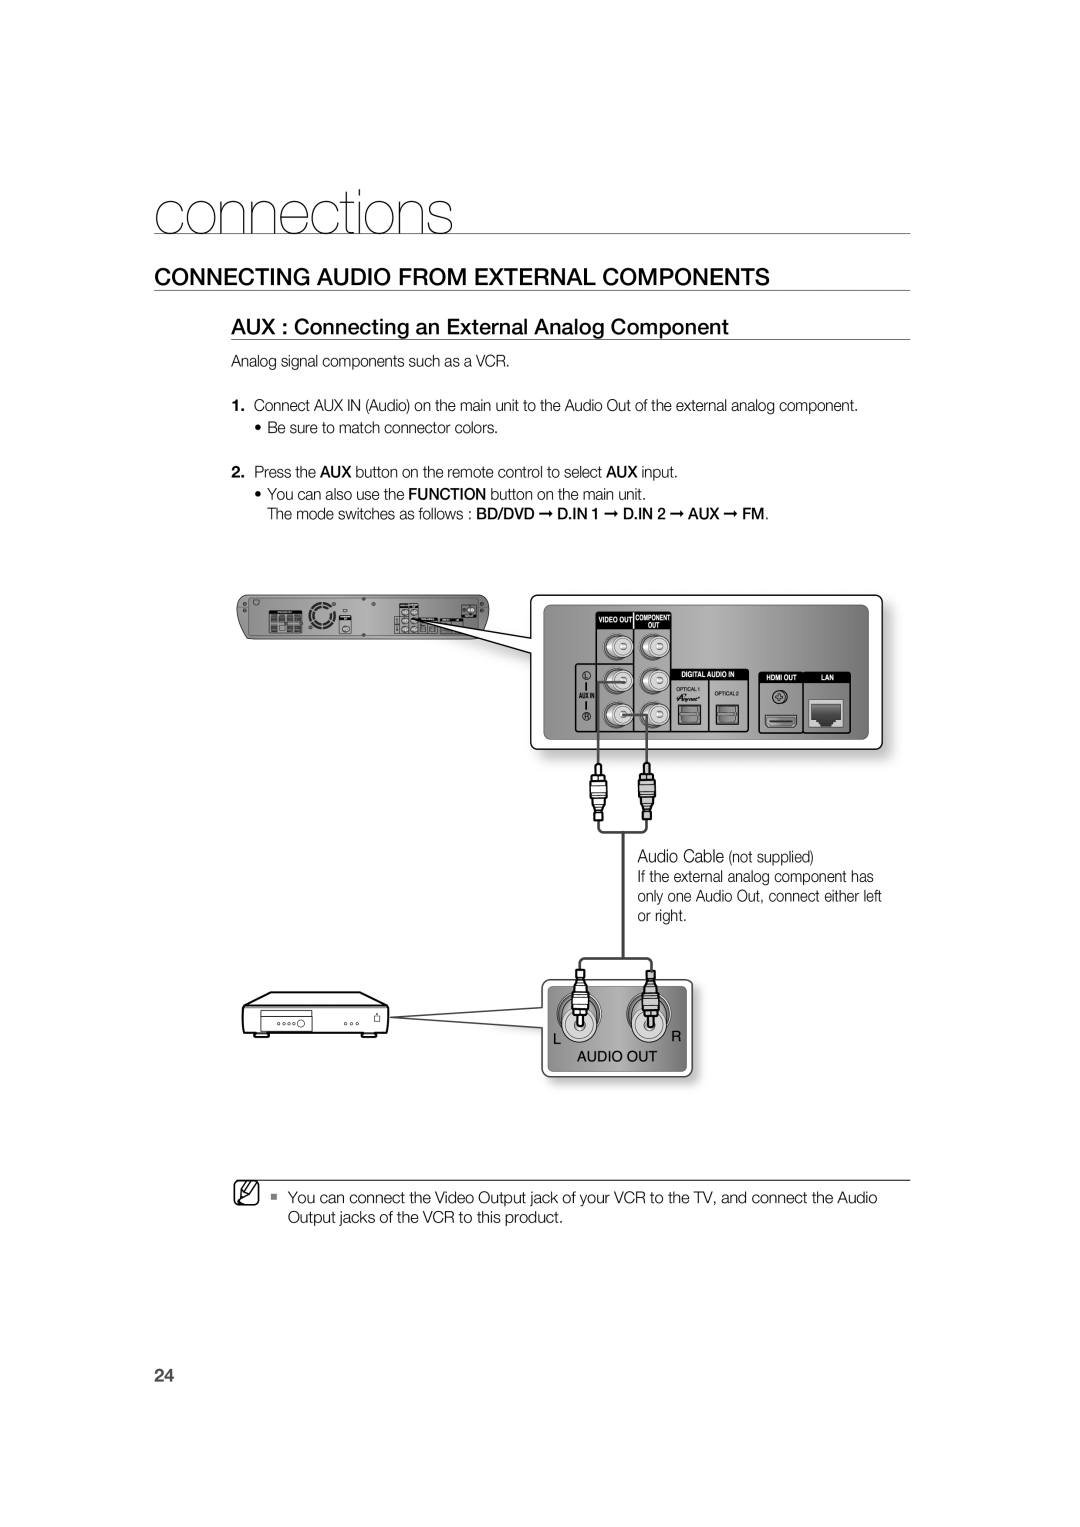 Samsung AH68-02019K Connecting Audio From External Components, AUX : Connecting an External Analog Component, connections 